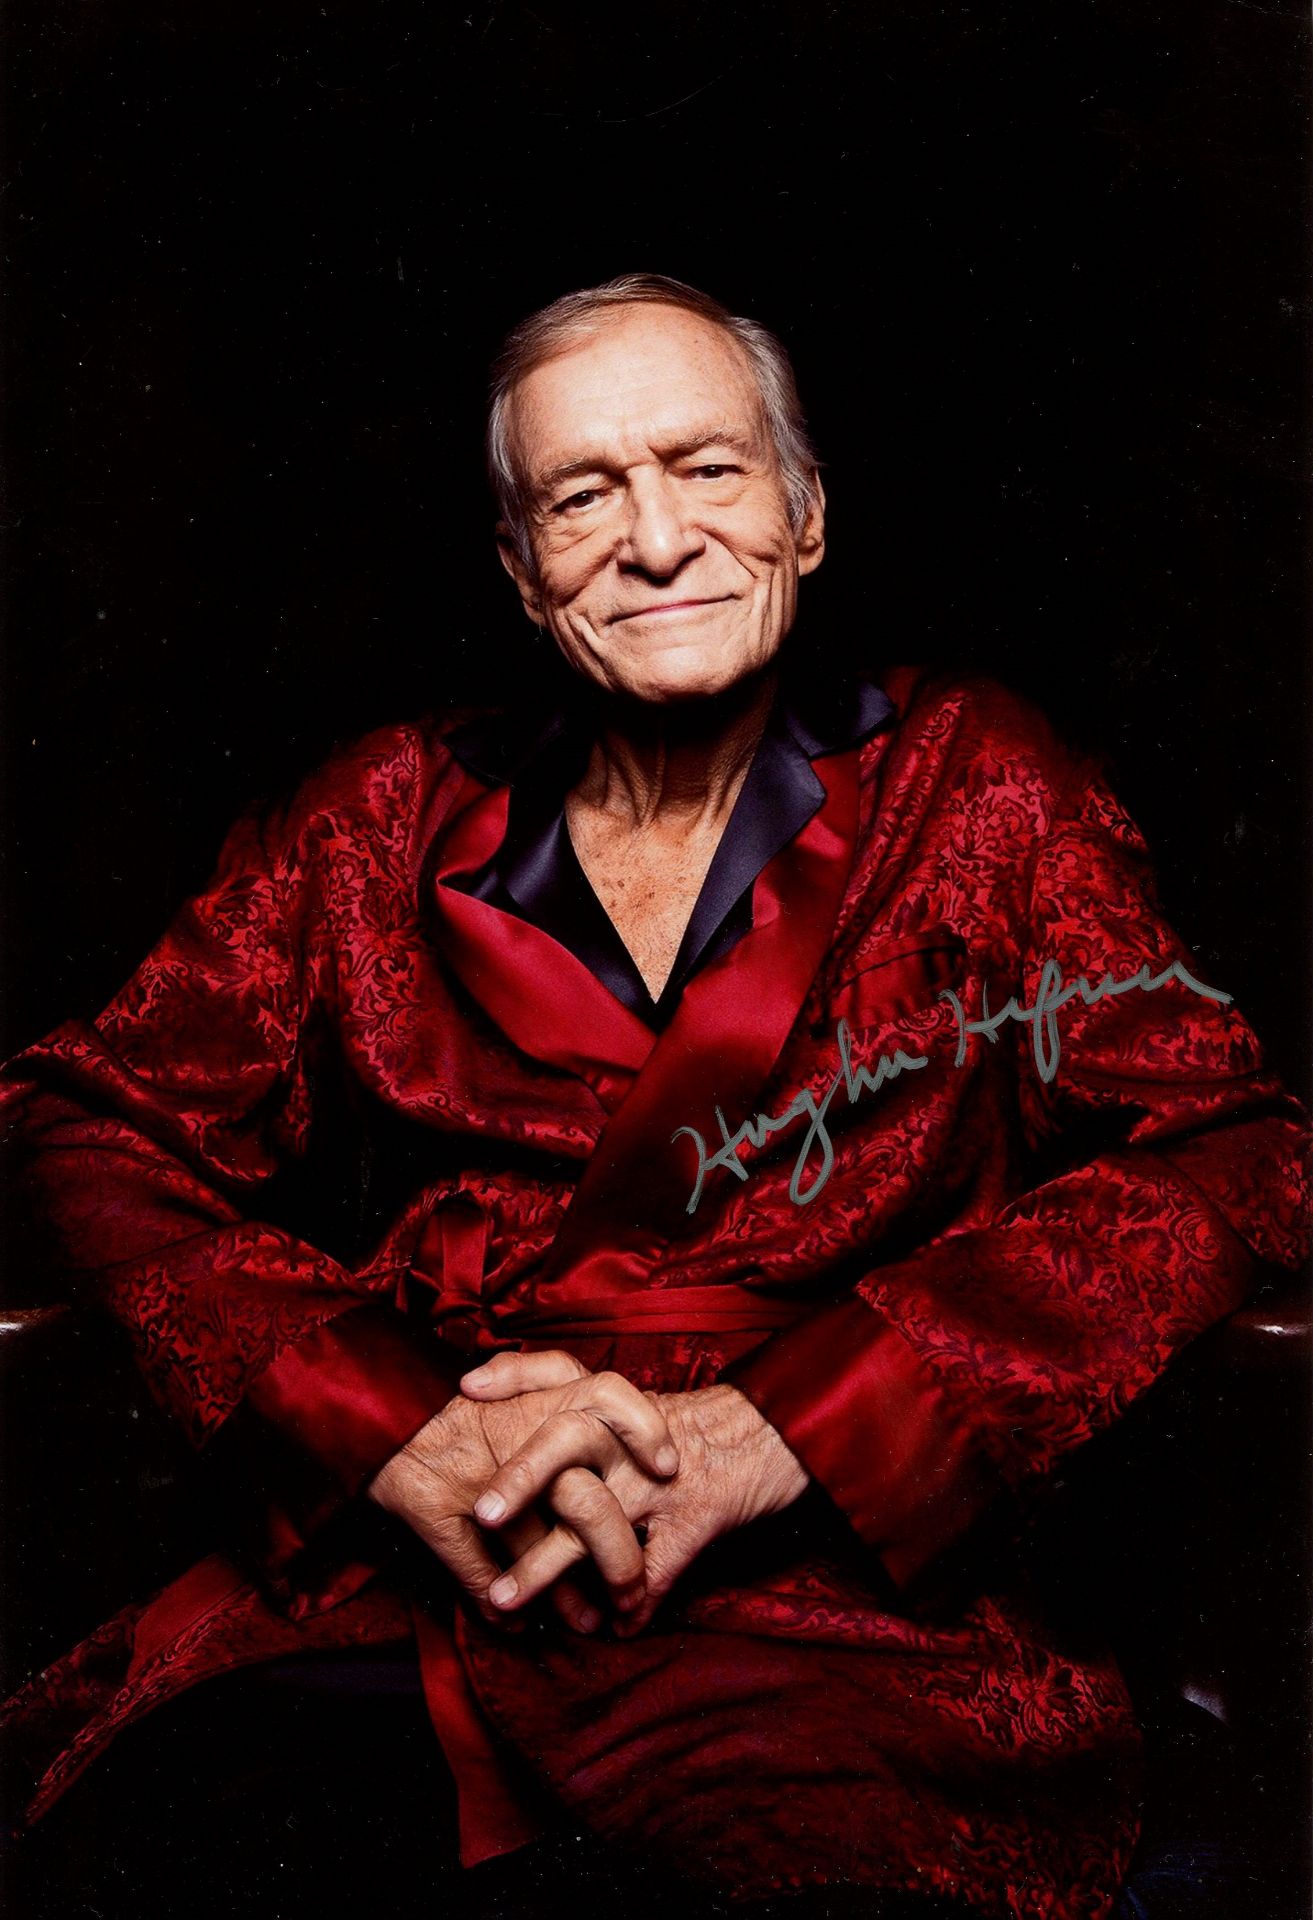 HEFNER HUGH: (1926-2017) American magazine publisher, founder and editor-in-chief of Playboy.